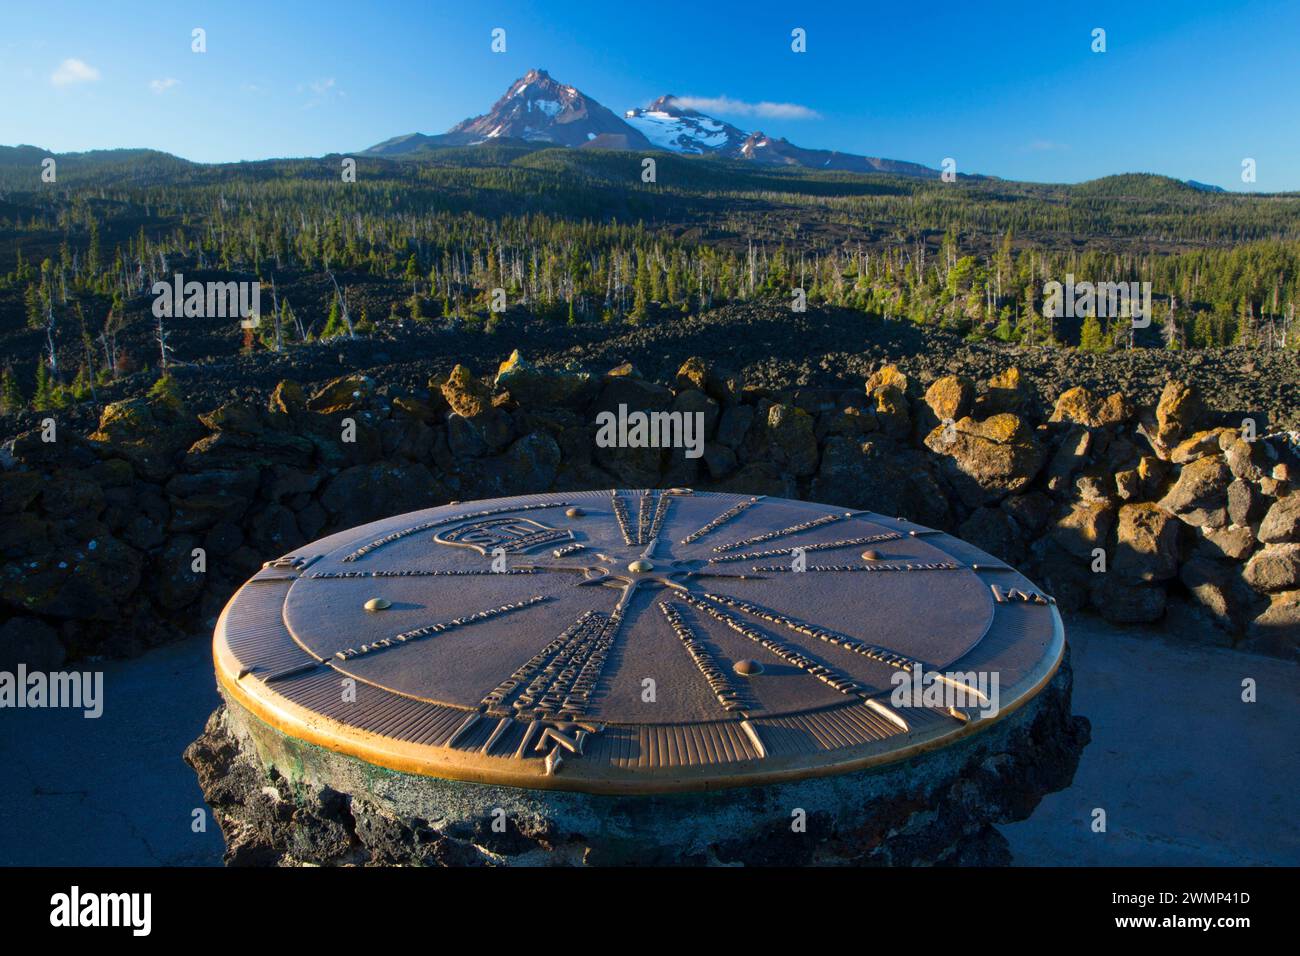 North and Middle Sister mit Dee Wright Observatory Mountain Finder, Willamette National Forest, Oregon Stockfoto